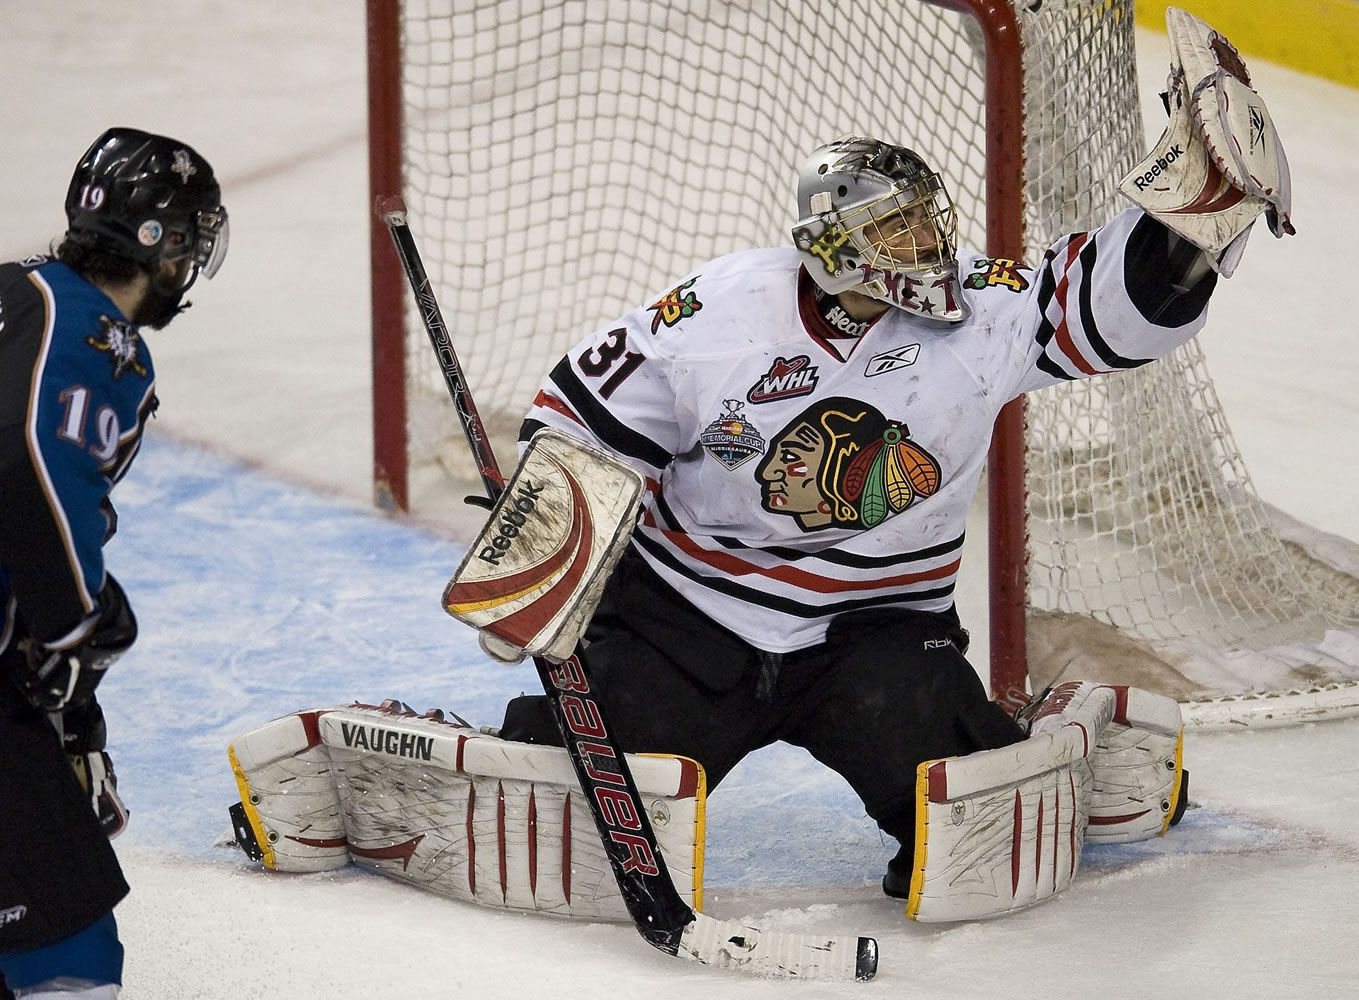 Winterhawks goaltender Mac Carruth, pictured here during last season's playoff run, earned two player of the week honors for going 3-0 with a shutout last week.